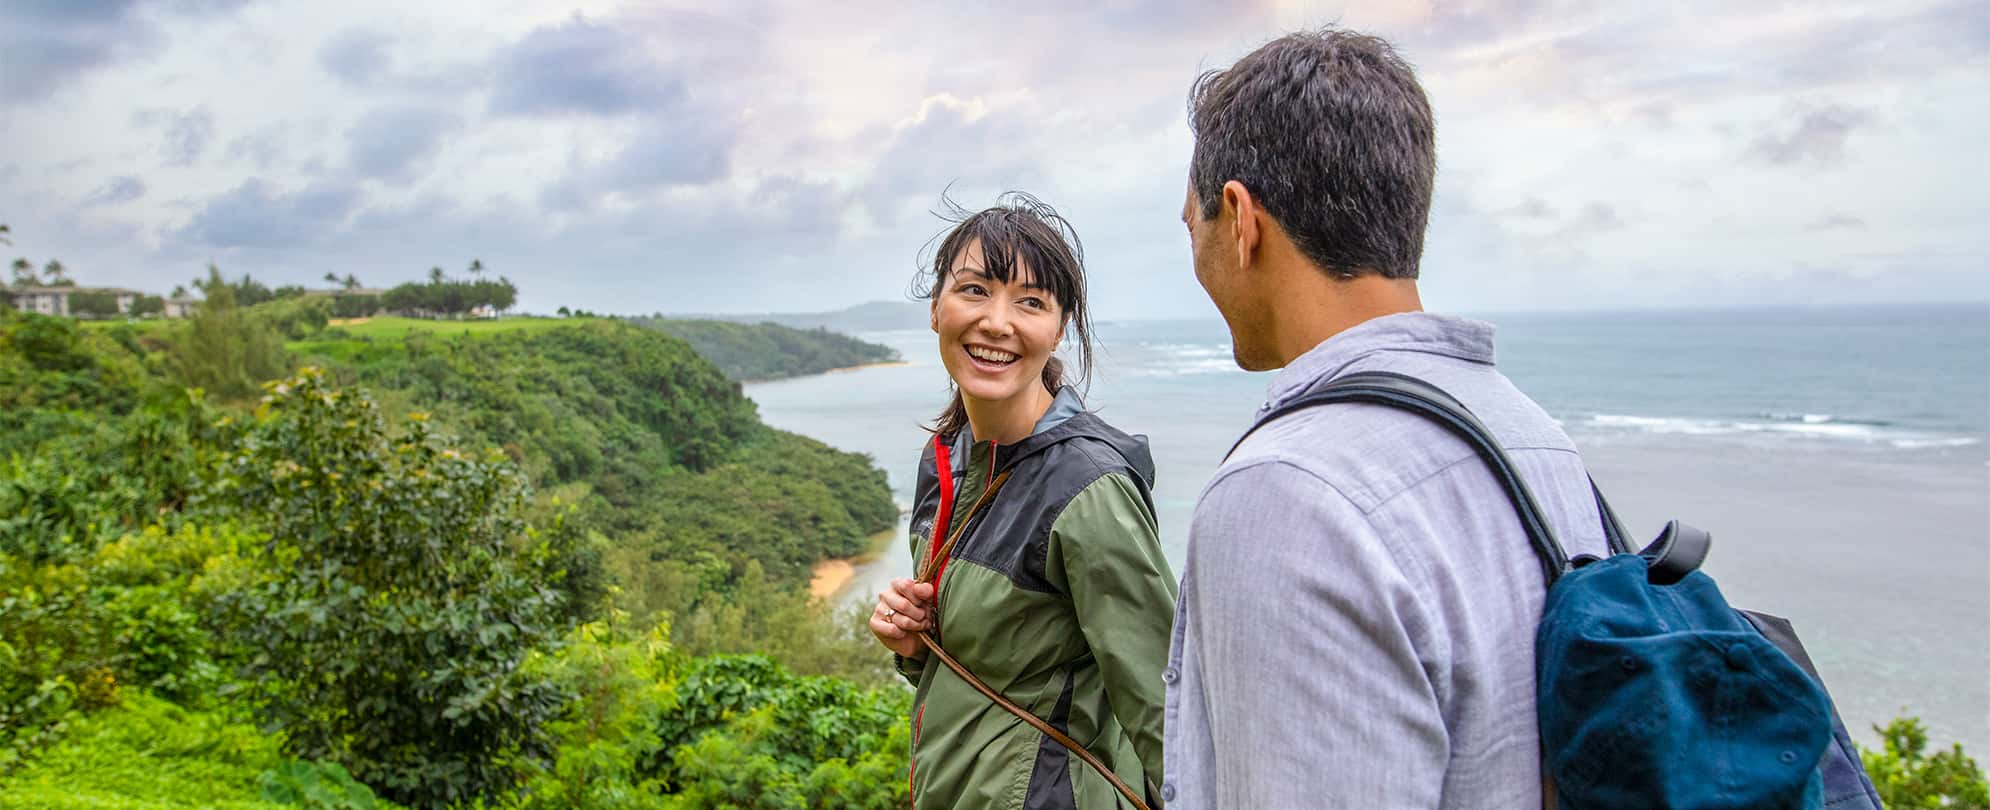 A couple on vacation hiking through lush mountains overlooking the ocean. 